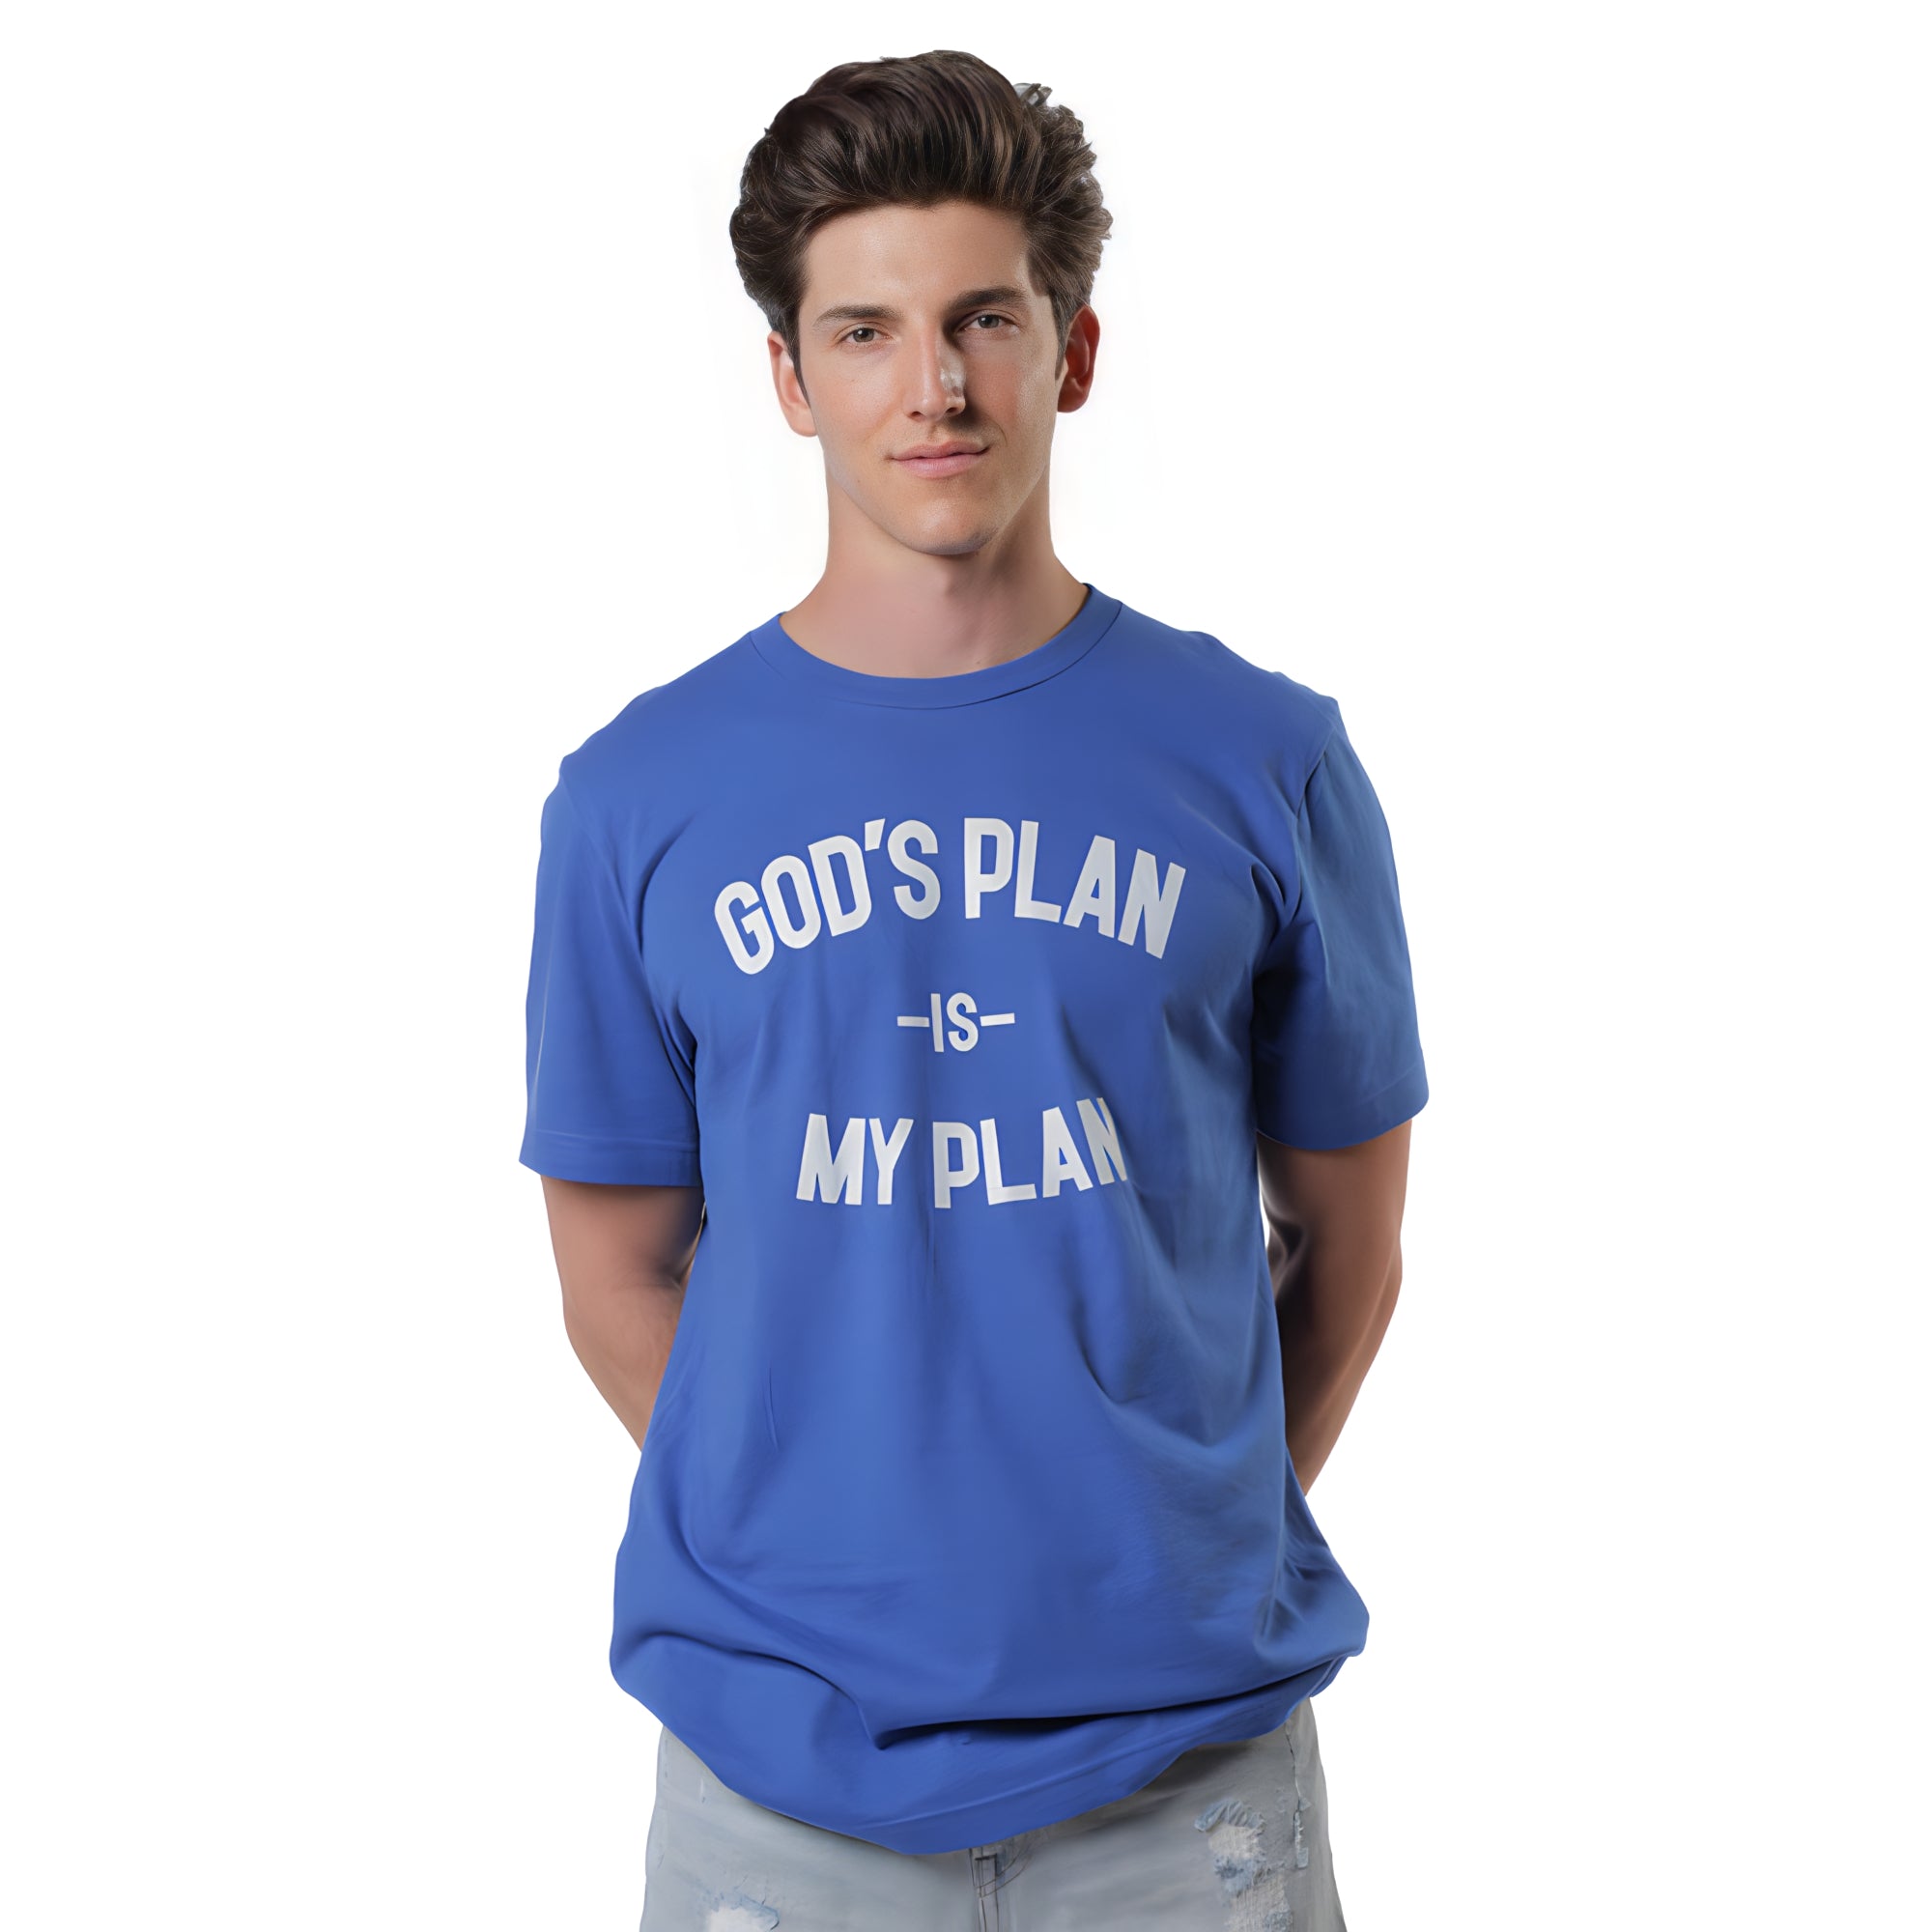 God's Plan My Plan Original Tee, Used By God, Used By God Clothing, Christian Apparel, Christian T-Shirts, Christian Shirts, christian t shirts for women, Men's Christian T-Shirt, Christian Clothing, God Shirts, christian clothing t shirts, Christian Sweatshirts, womens christian t shirts, t-shirts about jesus, God Clothing, Jesus Hoodie, Jesus Clothes, God Is Dope, Art Of Homage, Red Letter Clothing, Elevated Faith, Beacon Threads, God The Father Apparel